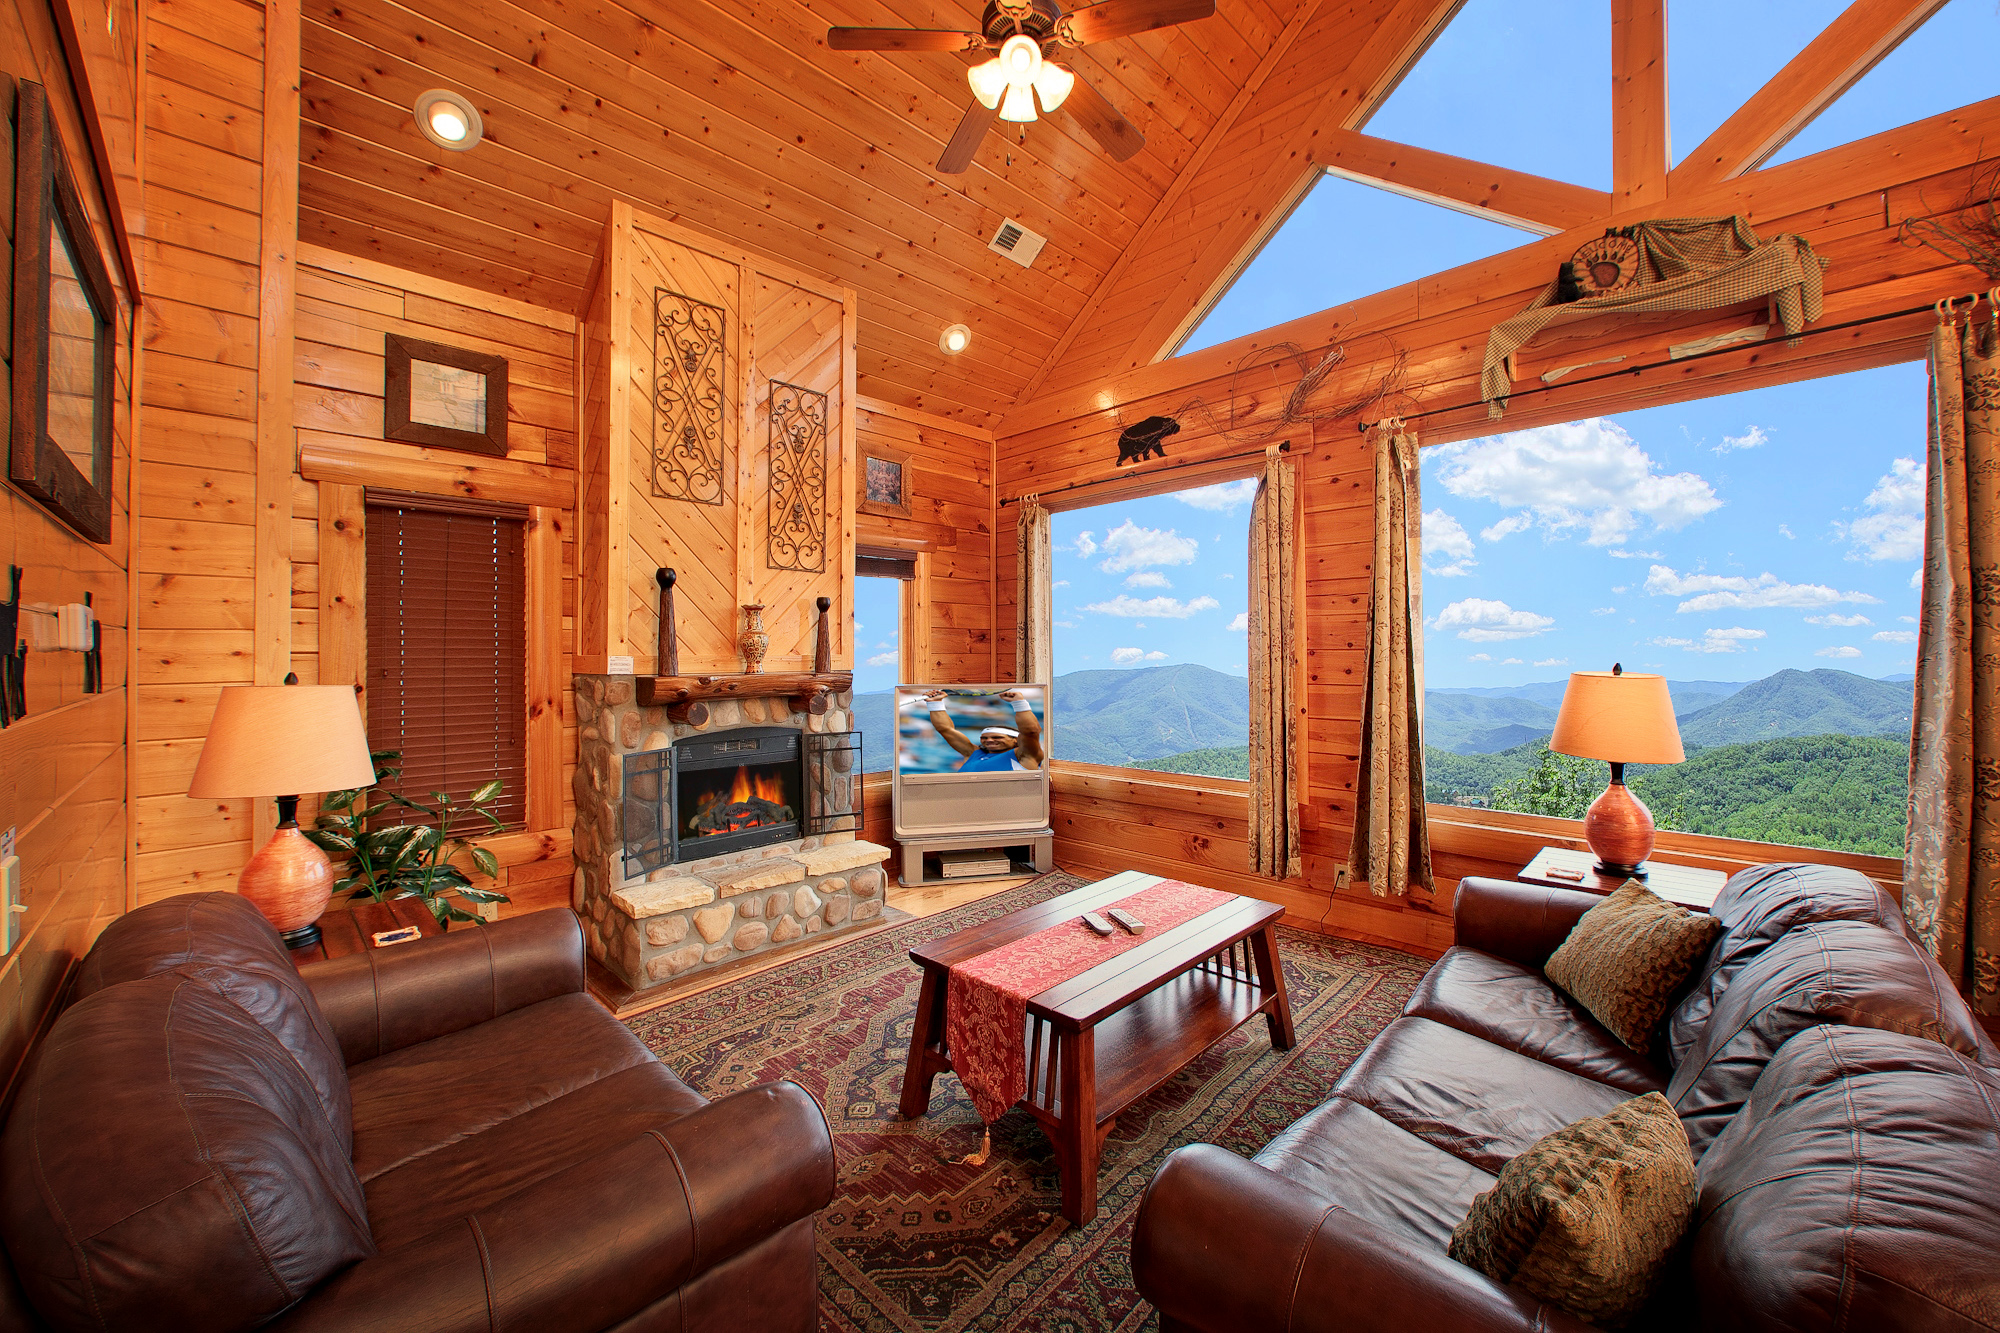 Cabin Rentals in the Smoky Mountains